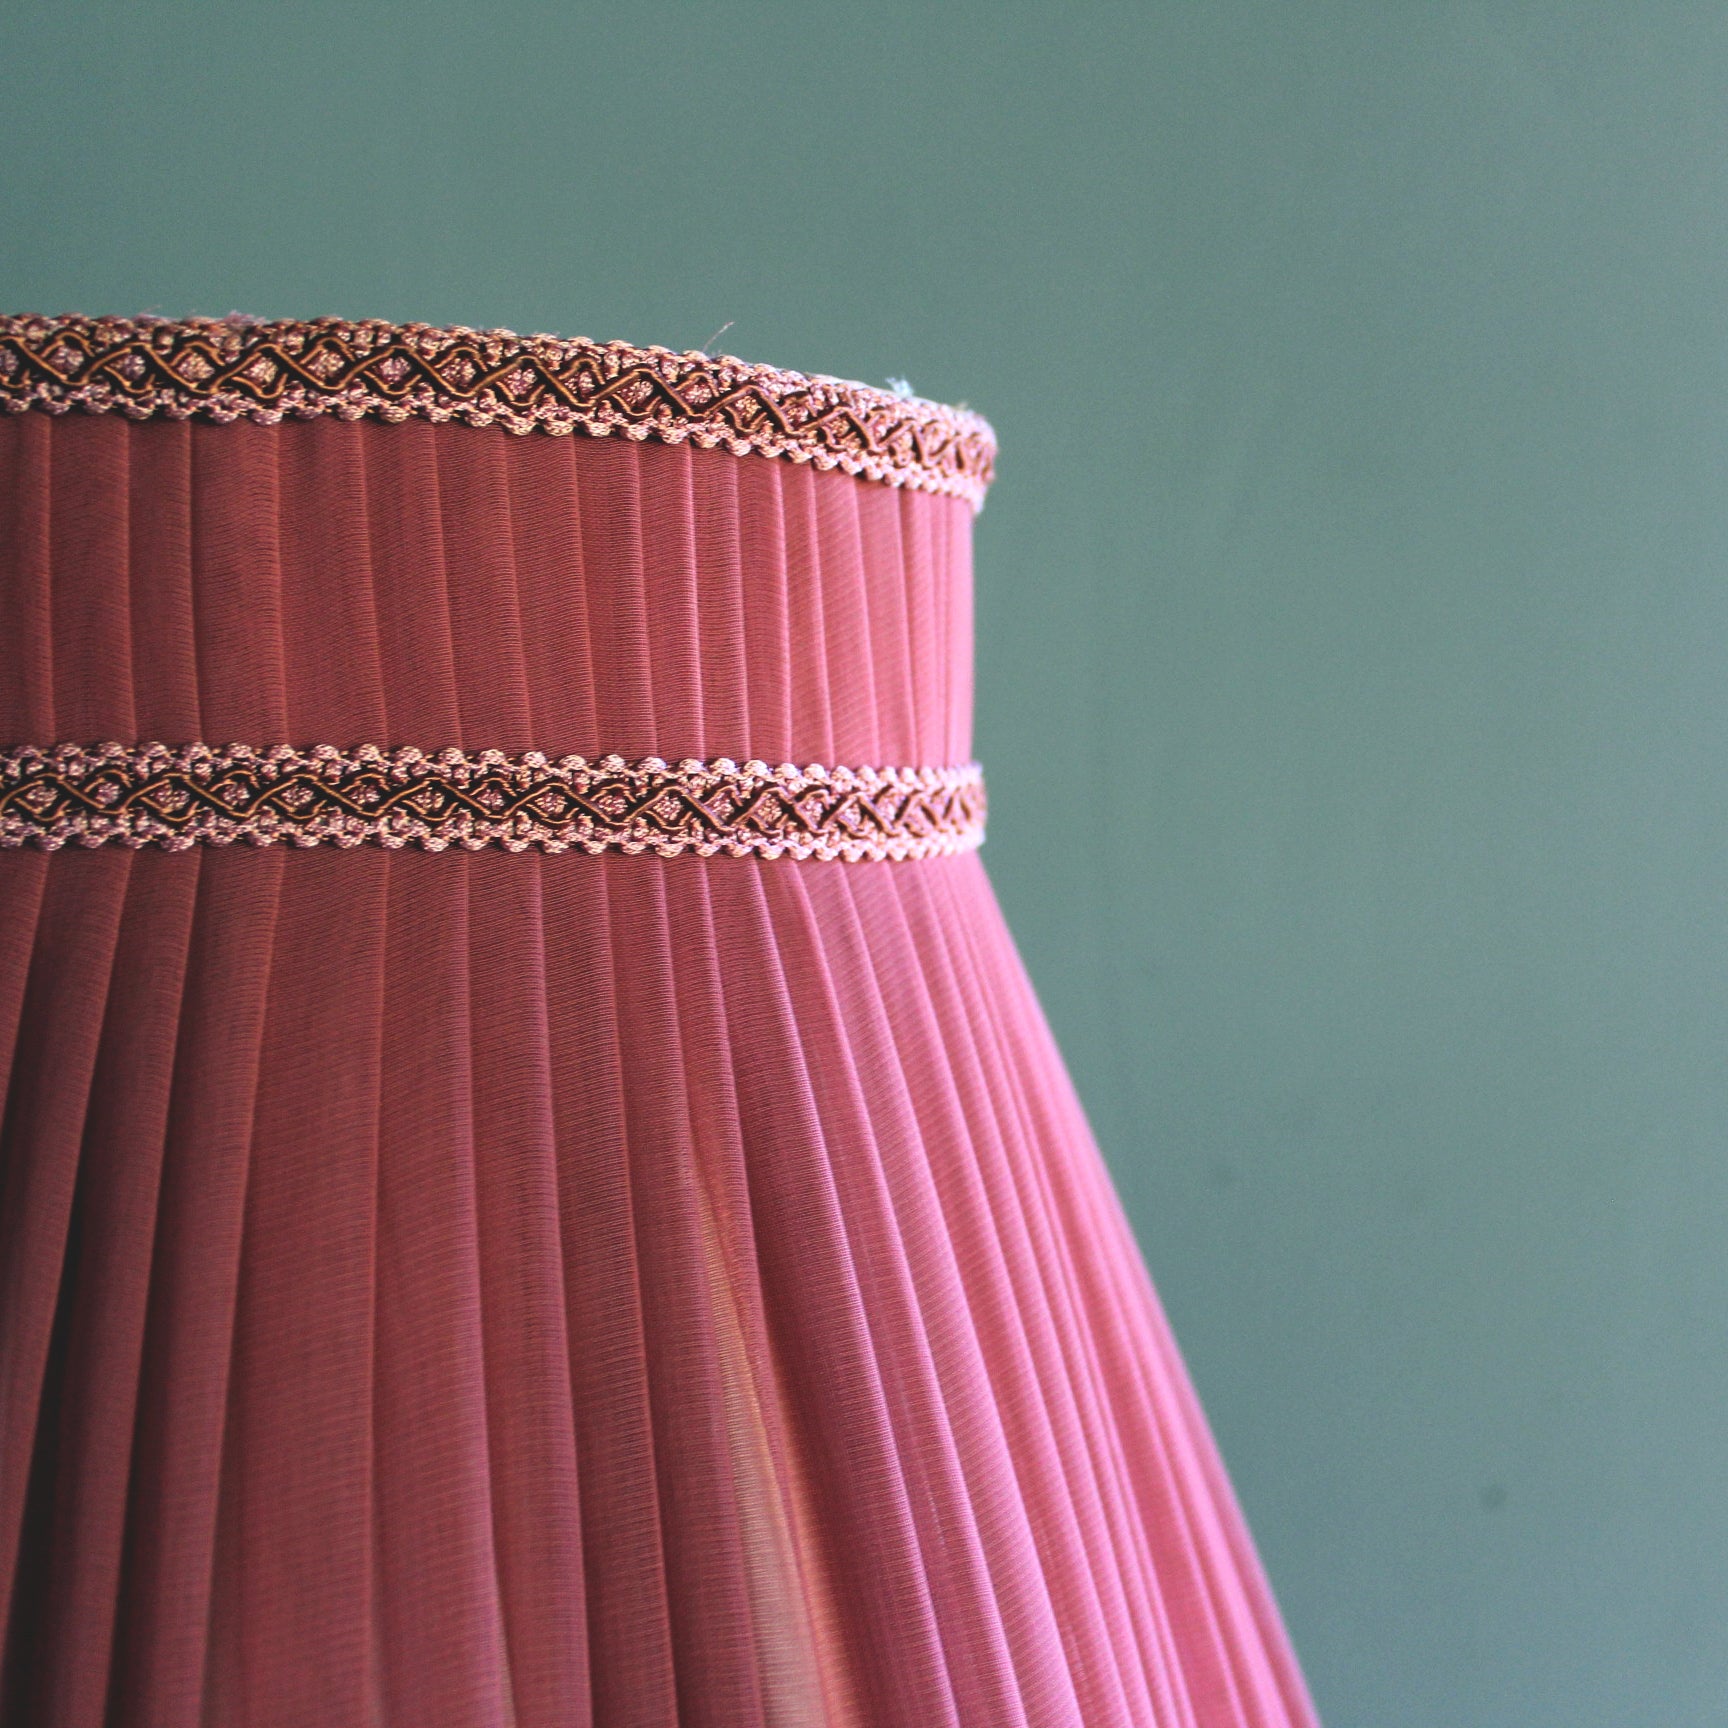 Bell Vintage Lampshade in Blush Pink